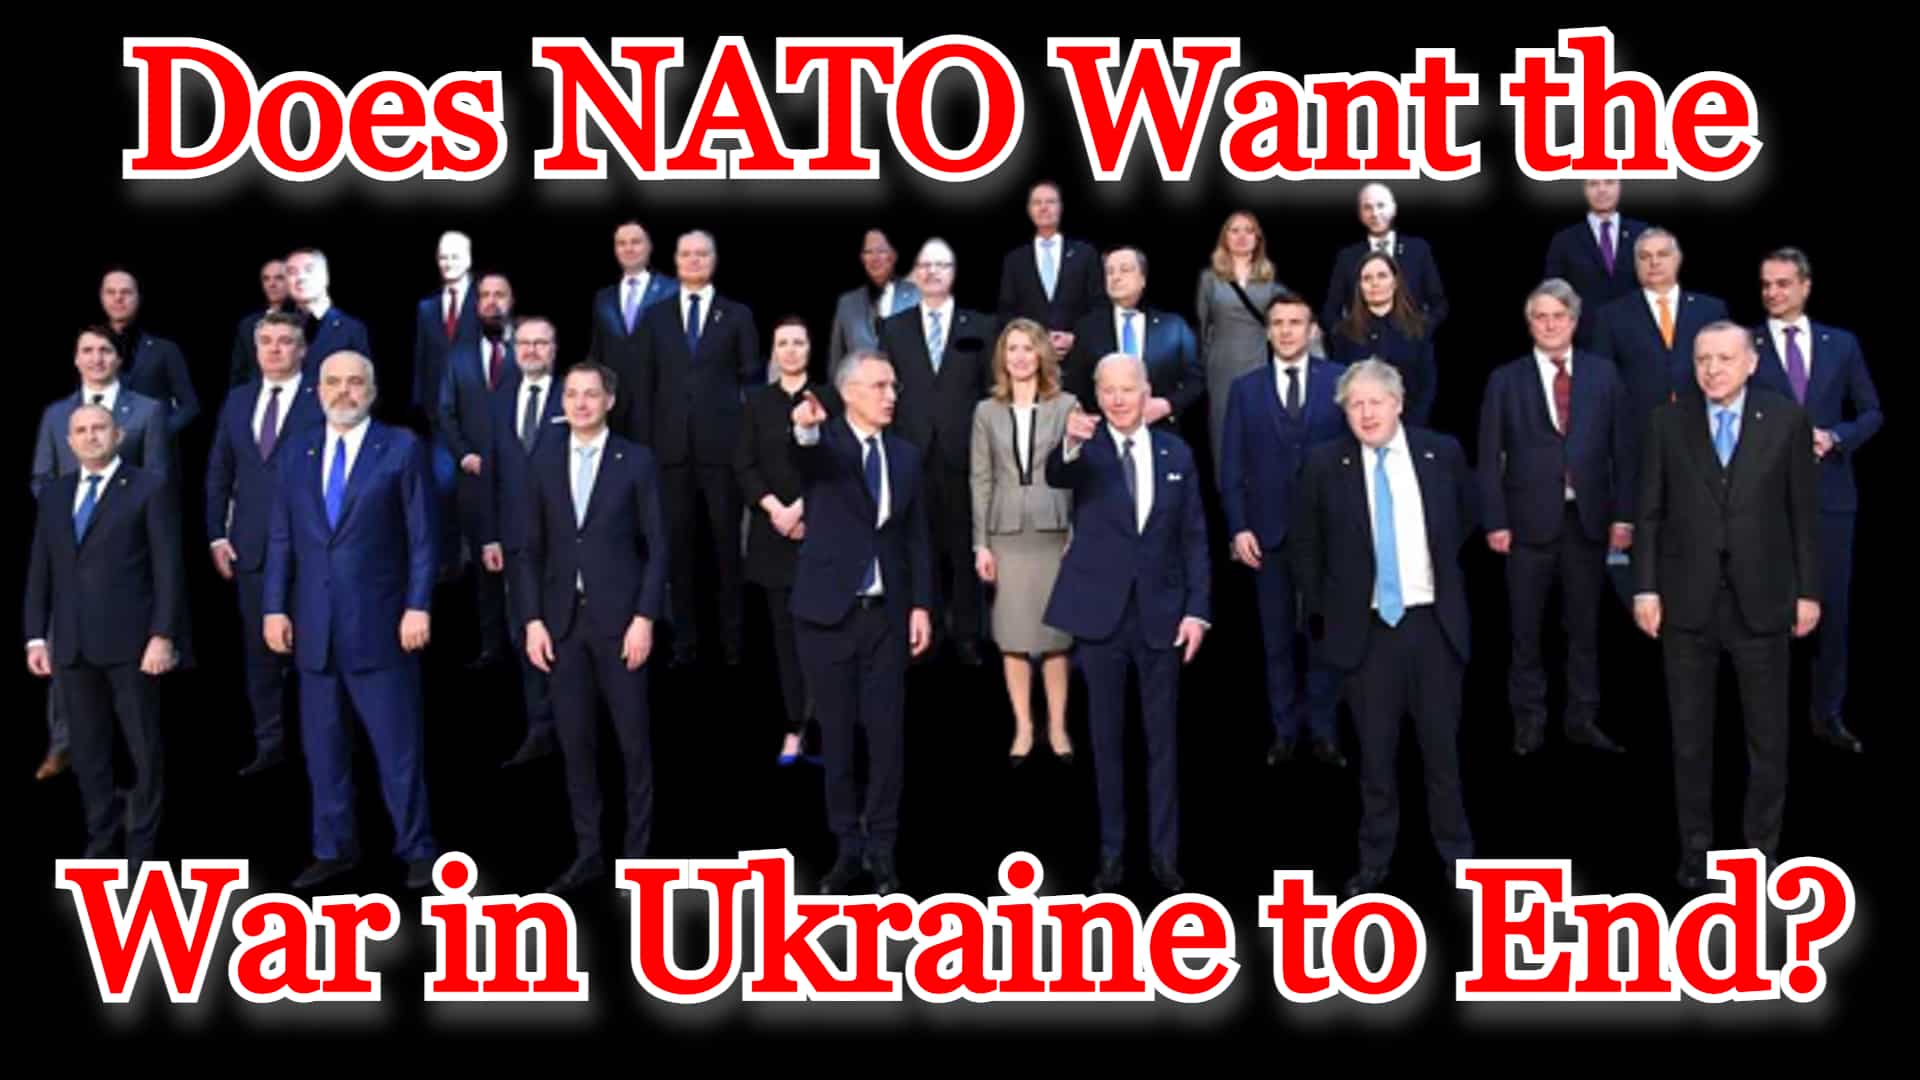 Conflicts of Interest #266: Does NATO Want the War in Ukraine to End?